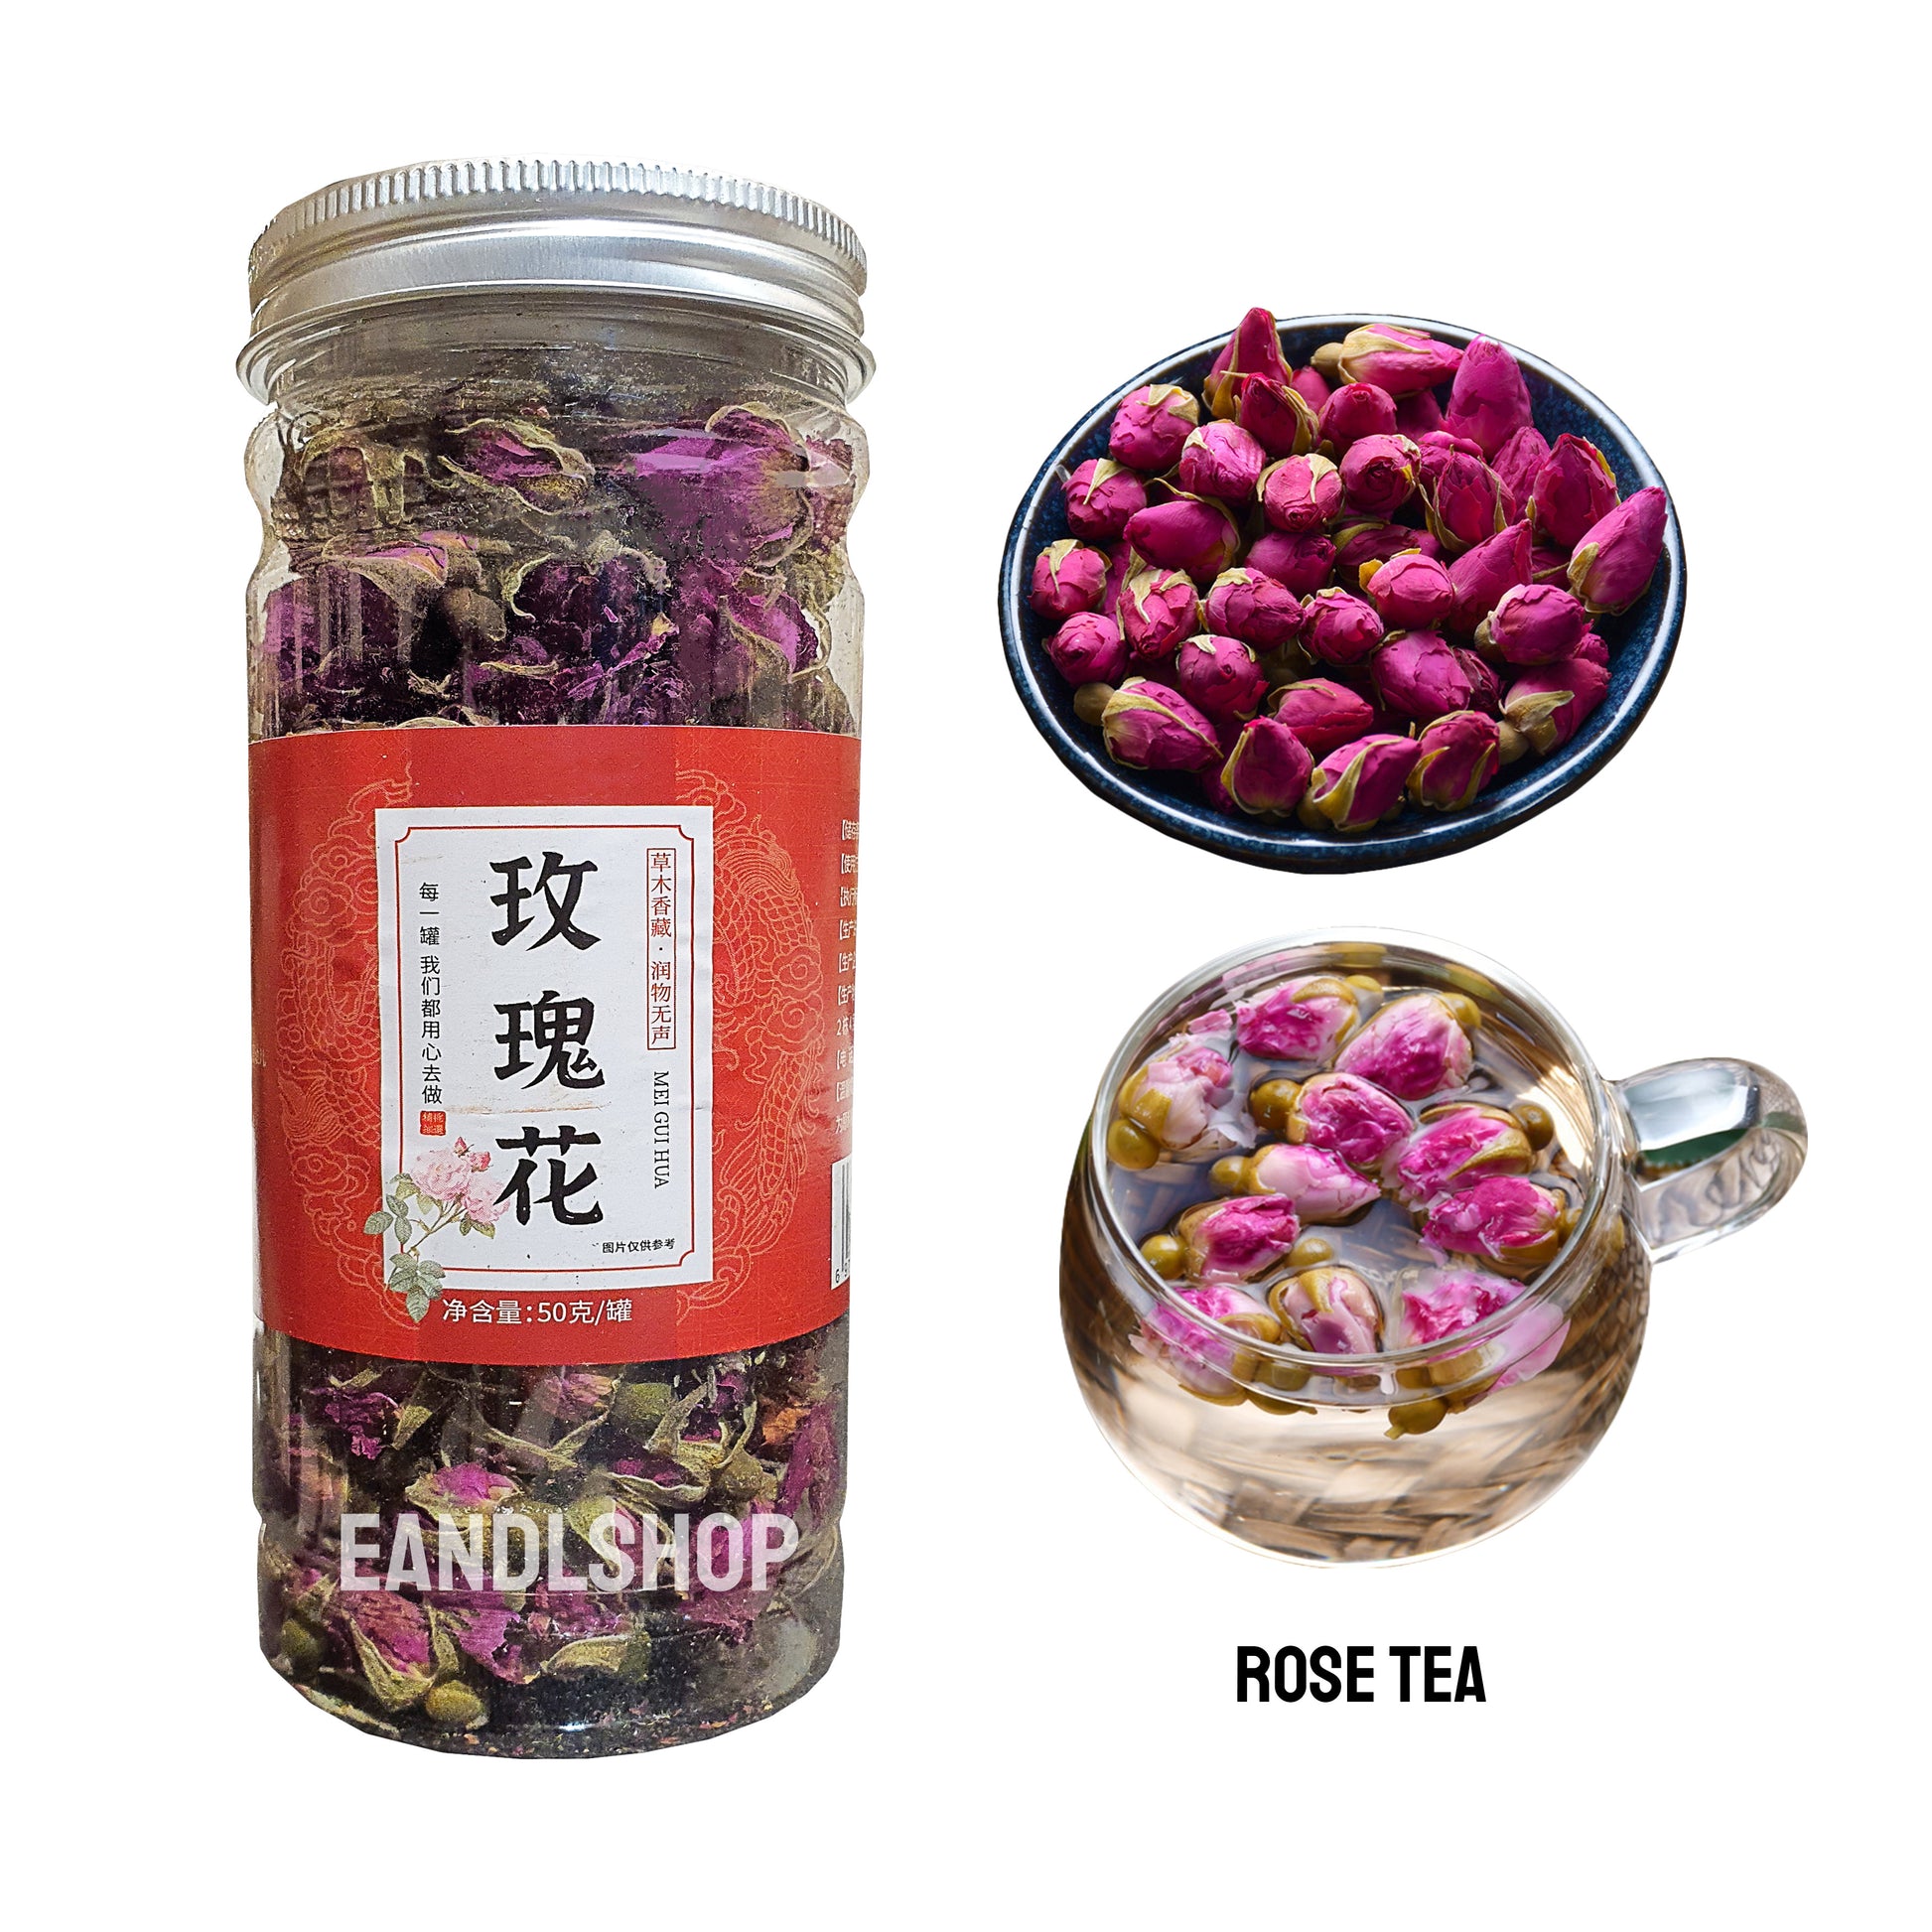 Rose Buds Tea. Old-school biscuits, modern snacks (chips, crackers), cakes, gummies, plums, dried fruits, nuts, herbal tea – available at www.EANDLSHOP.com